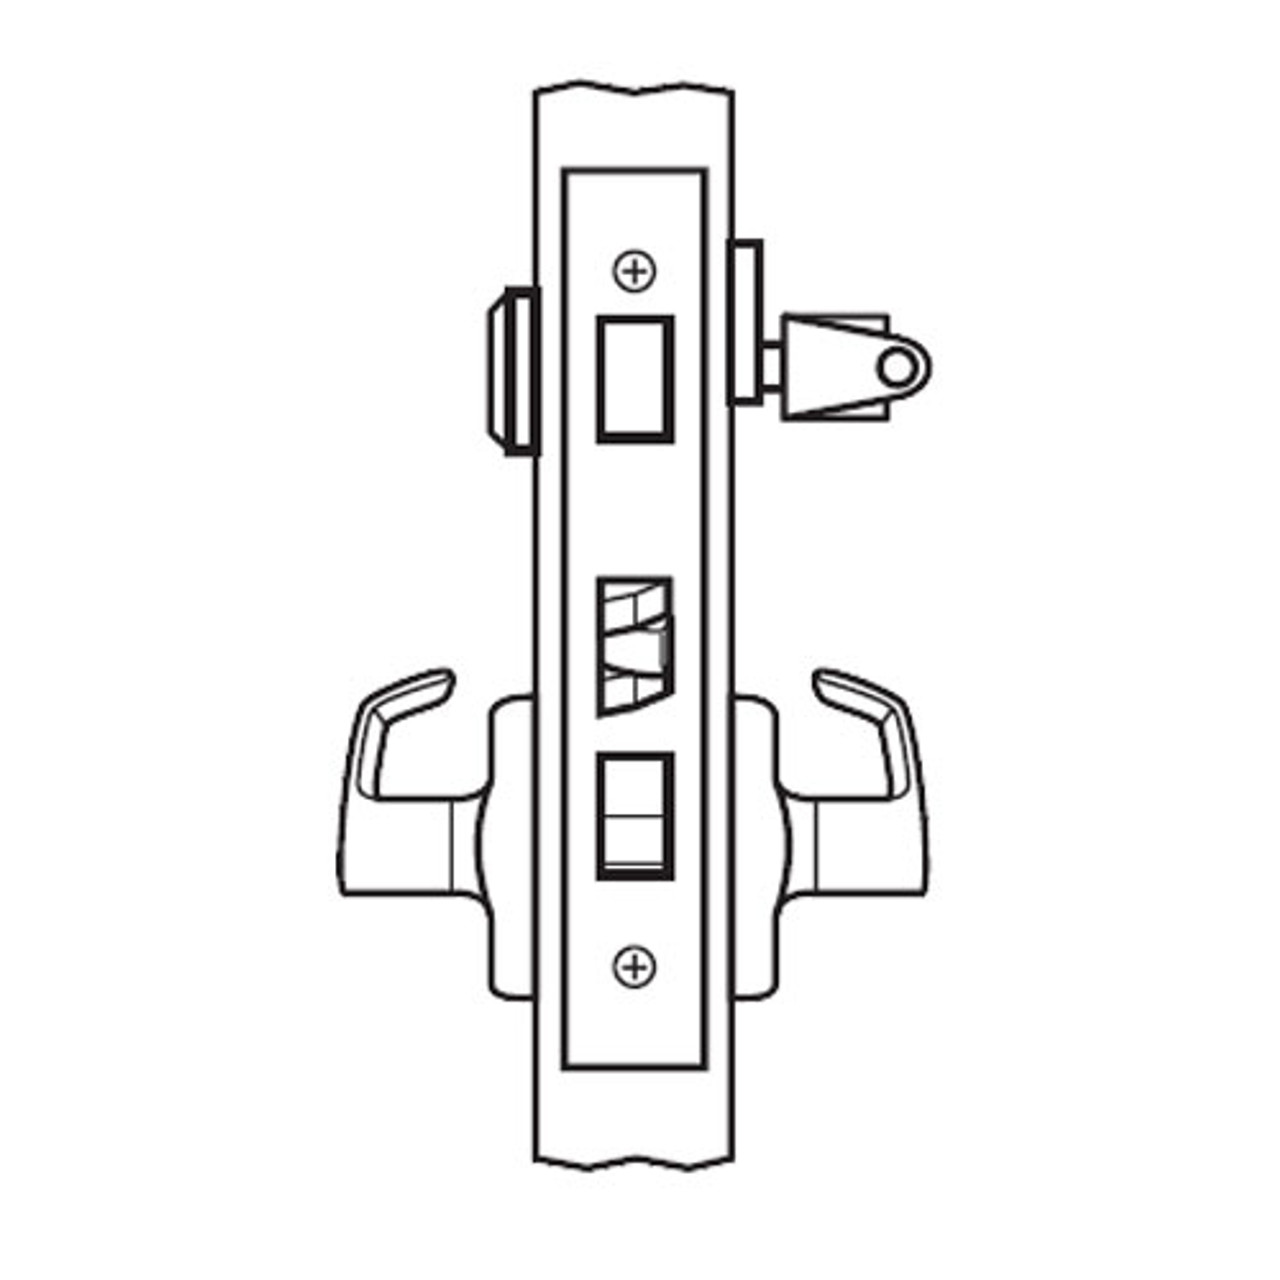 BM21-BRG-04 Arrow Mortise Lock BM Series Entrance Lever with Broadway Design and G Escutcheon in Satin Brass